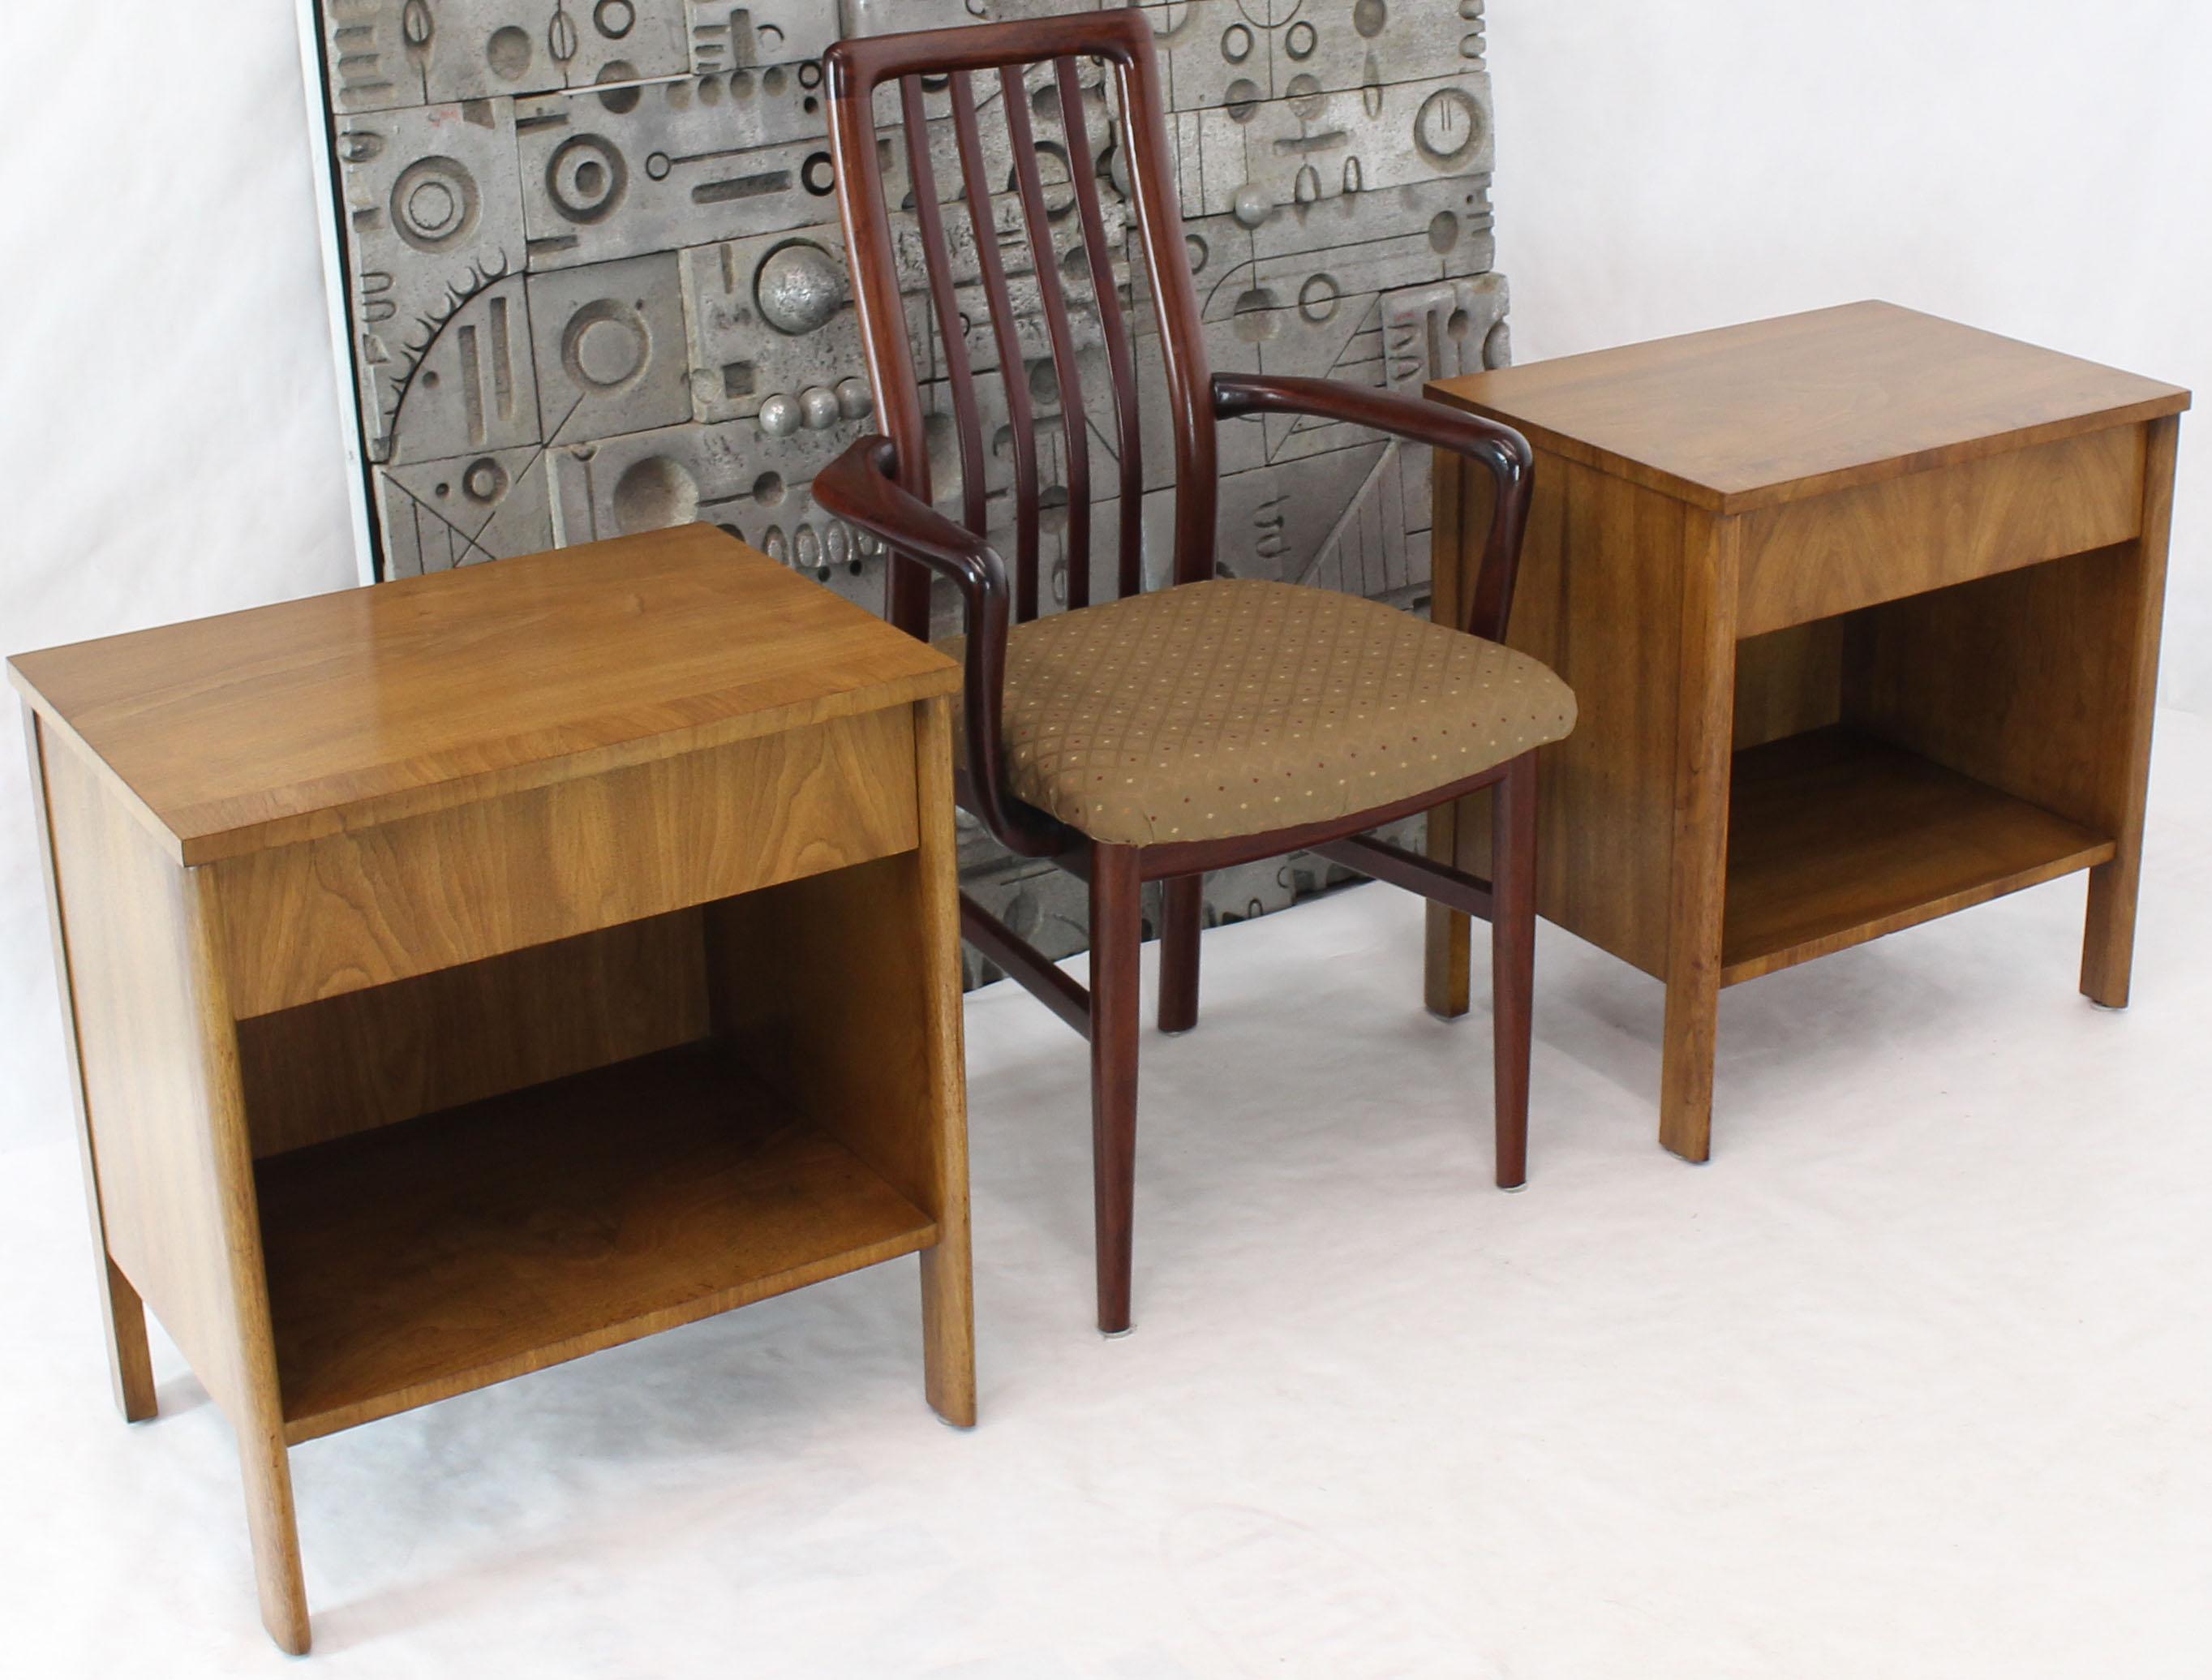 Pair of Mid-Century Modern walnut nightstands side bed tables by Widdicomb. Medium light american walnut finish. One drawer open space on the bottom.